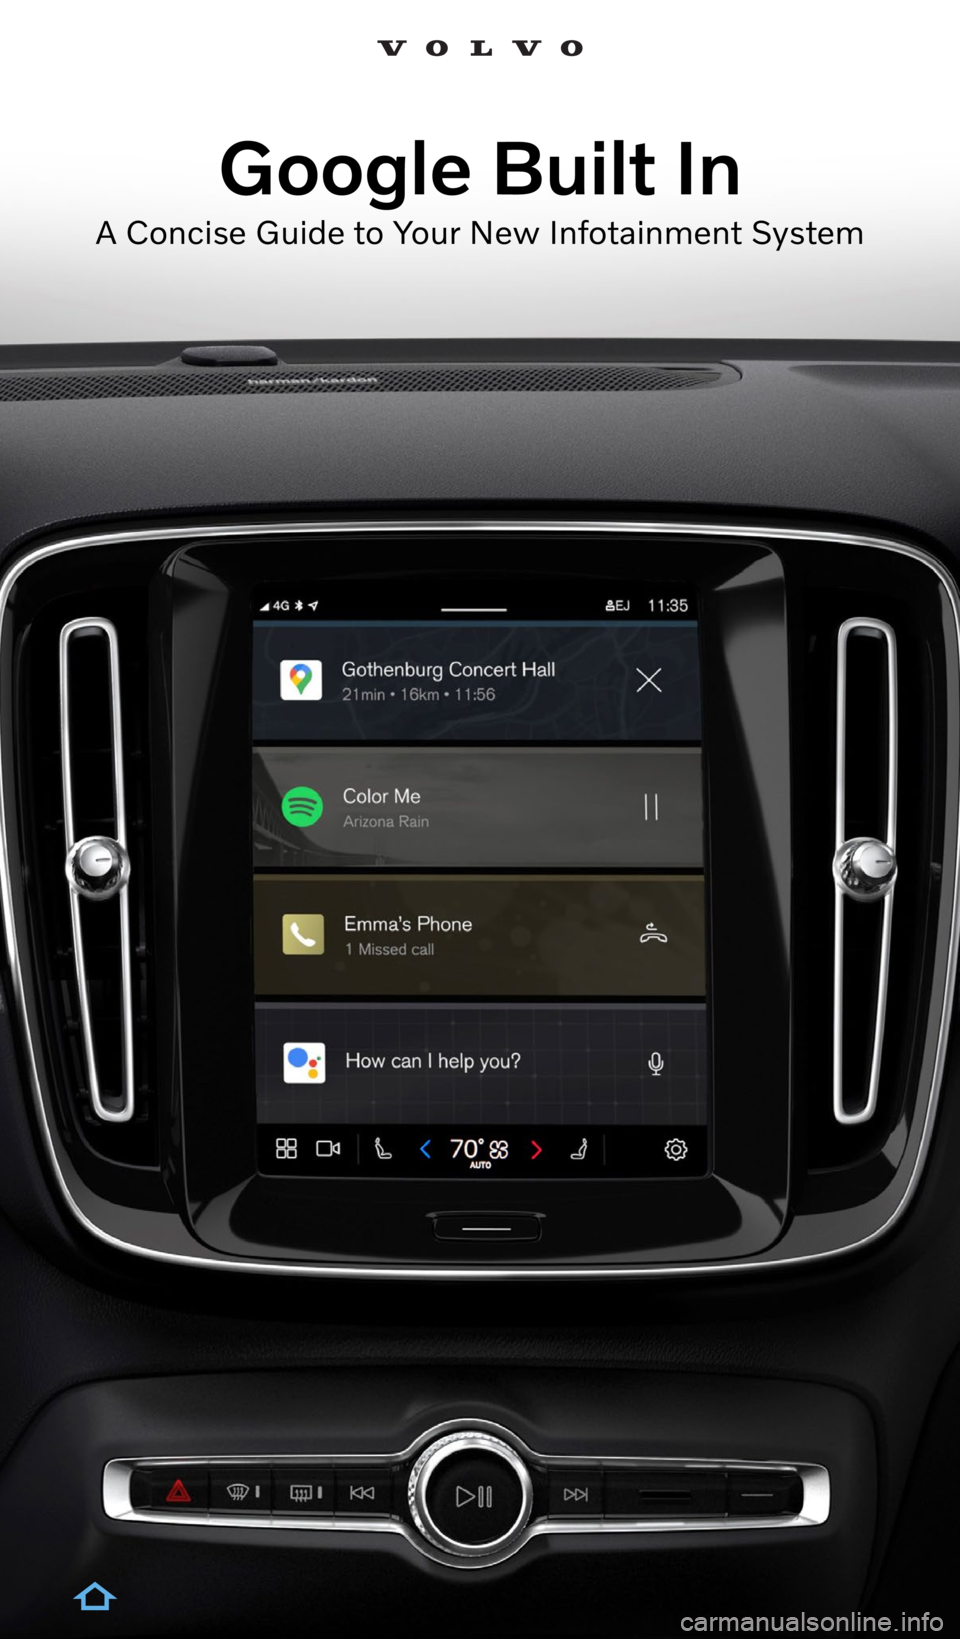 VOLVO XC60 RECHARGE 2022  Google Digital Guide Google Built In
A Concise Guide to Your New Infotainment System  